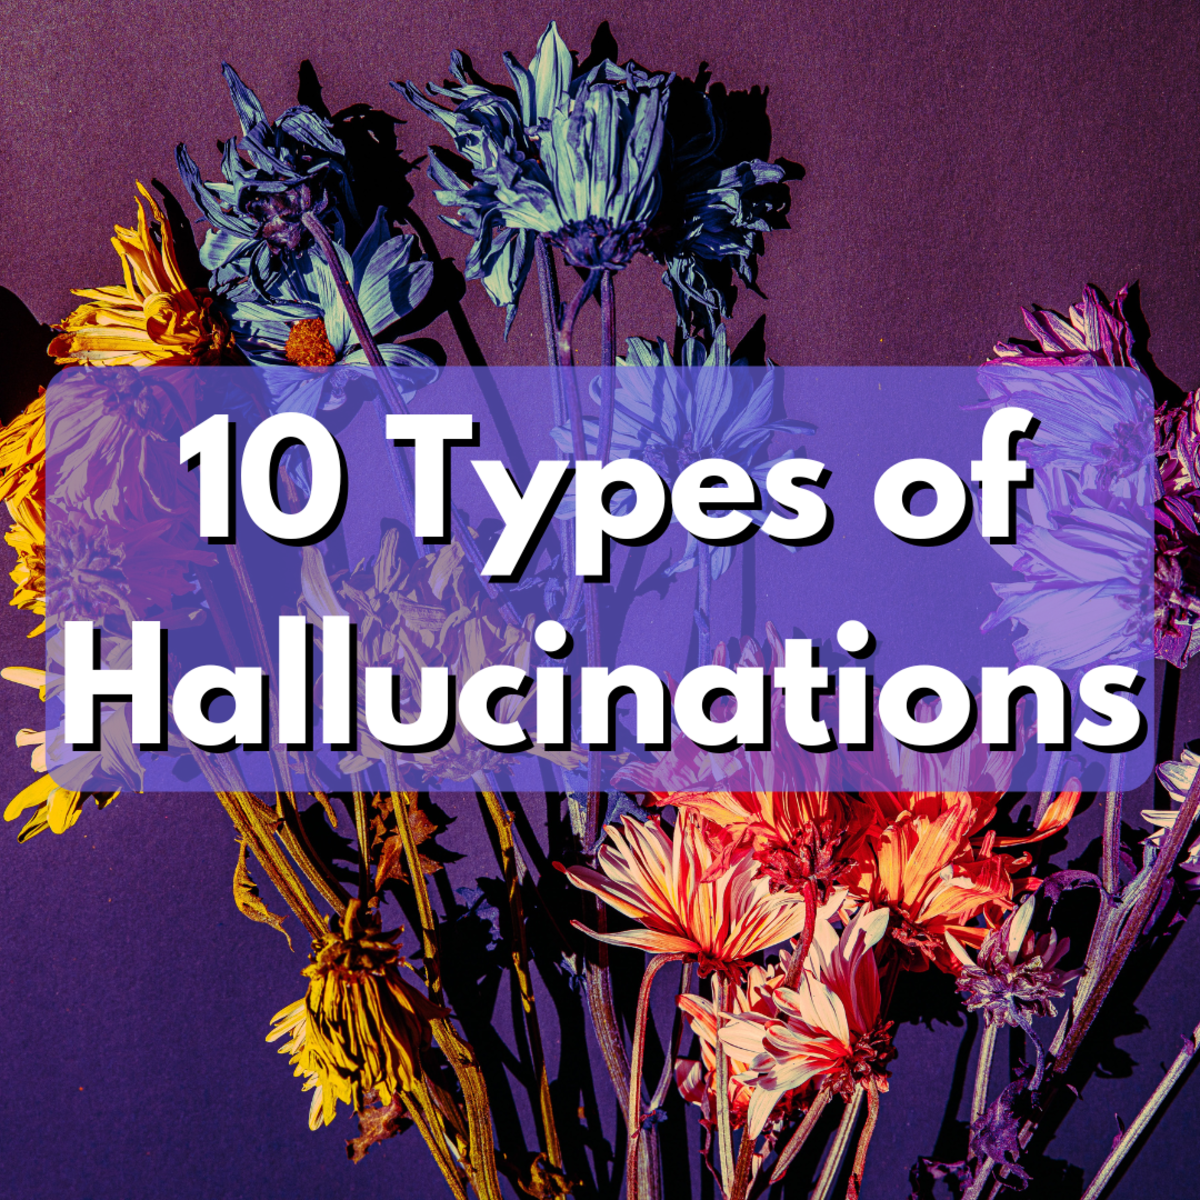 Read on to learn about 10 different types of hallucinations.